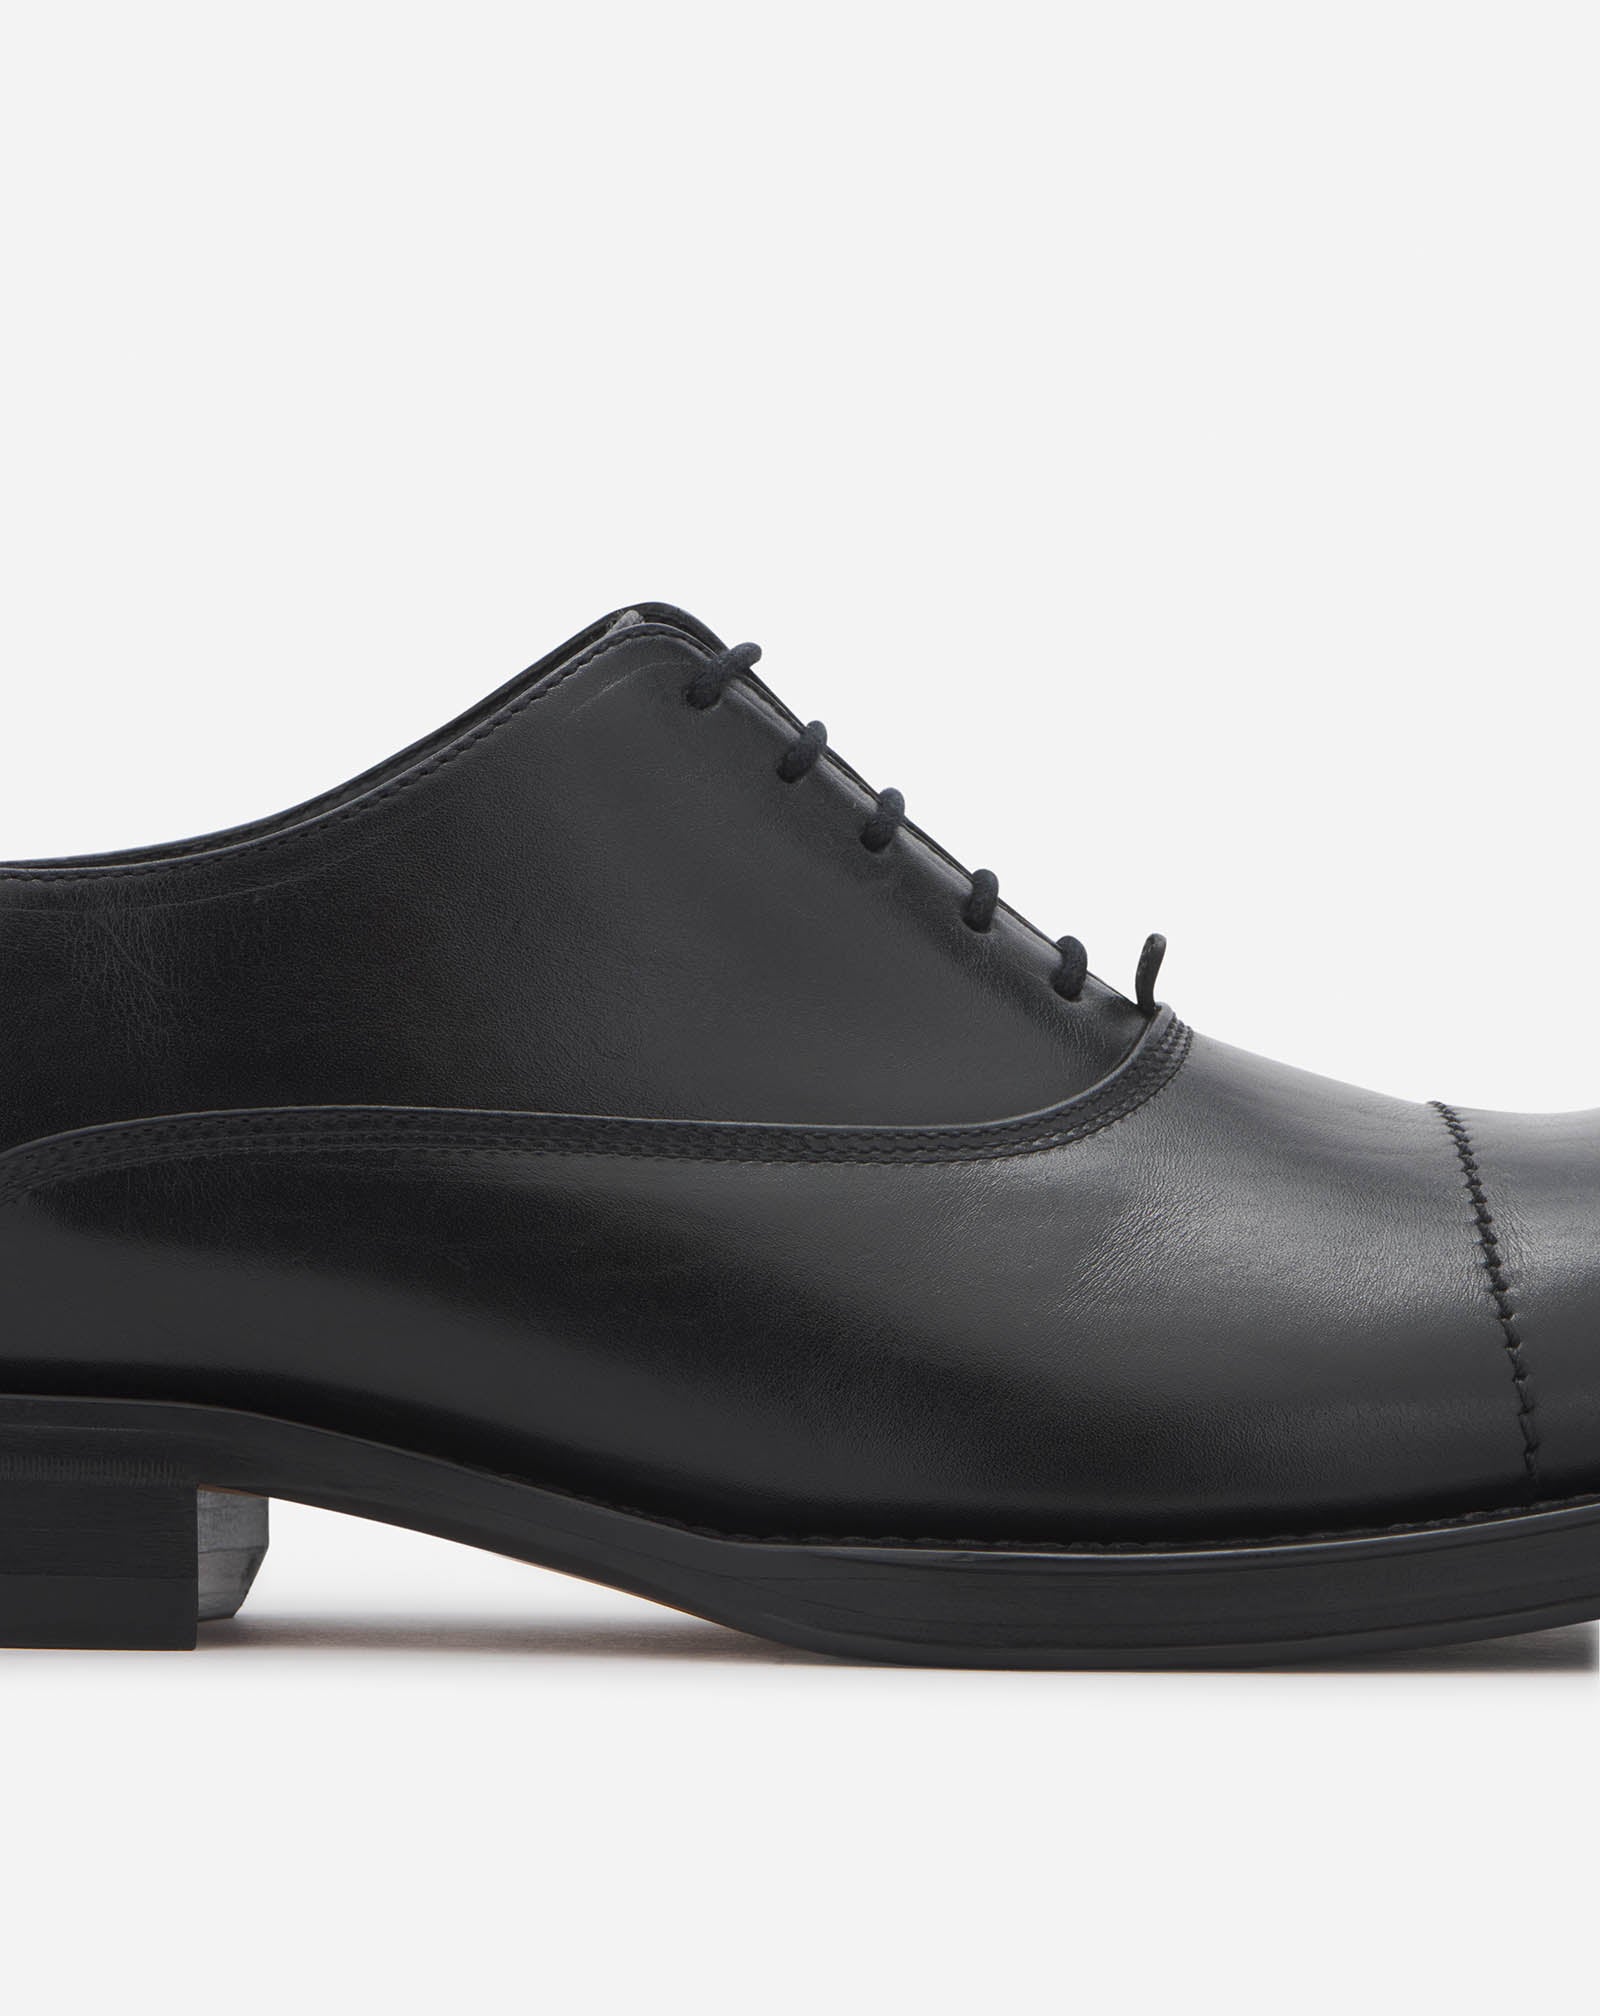 currency Apply Imperial LEATHER MEDLEY OXFORD SHOES BLACK | Lanvin – LANVIN